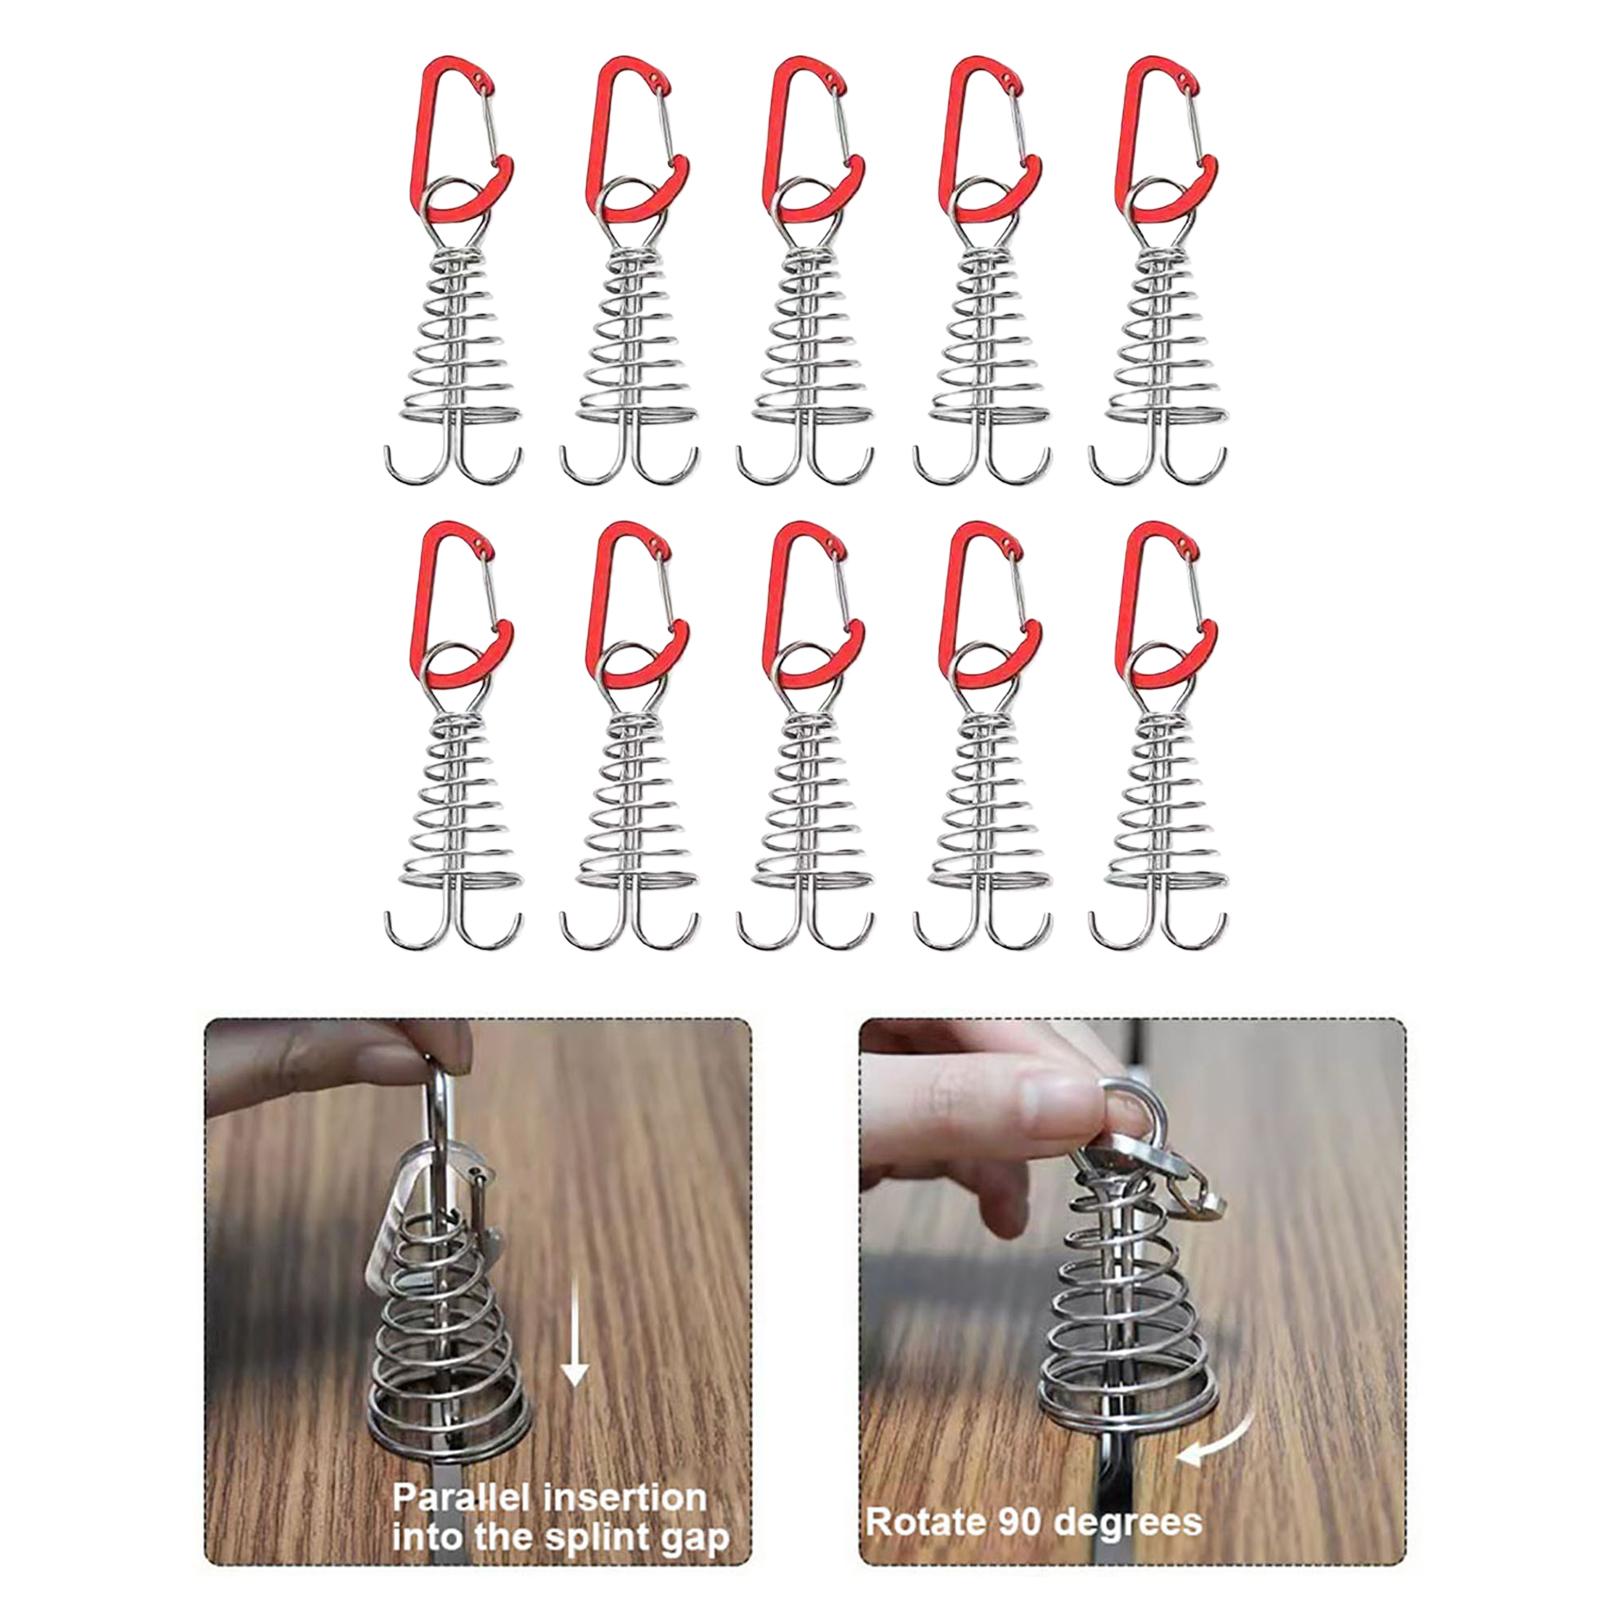 10Pcs Tent Stakes Deck Anchor Peg Spring Buckle Awning Tent Accessories Nail Hiking